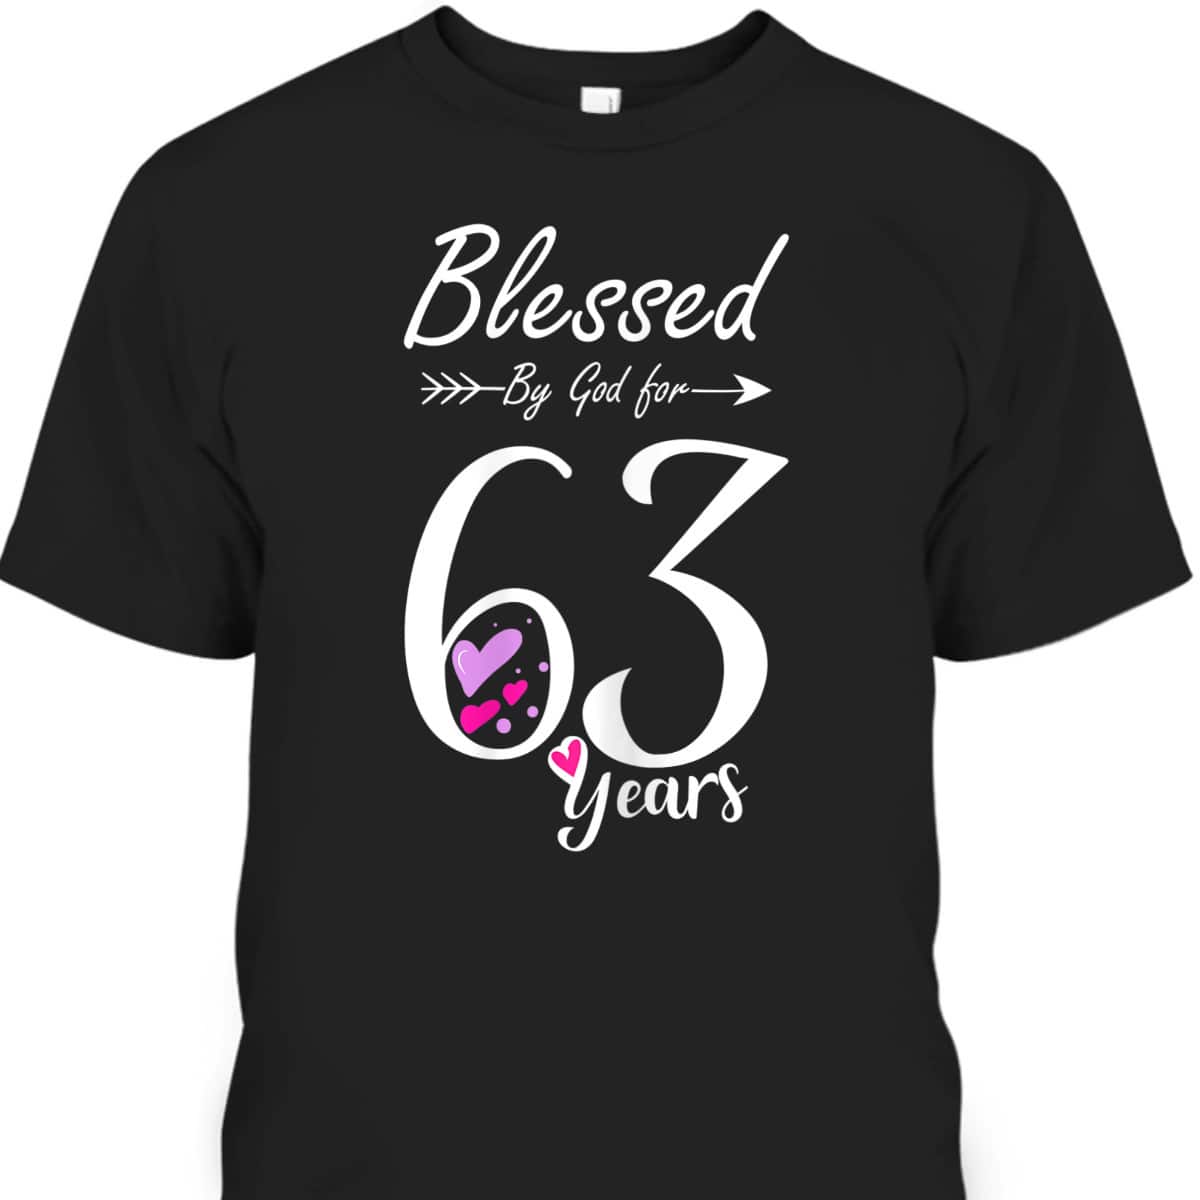 63rd Birthday T-Shirt Blessed By God For 63 Years